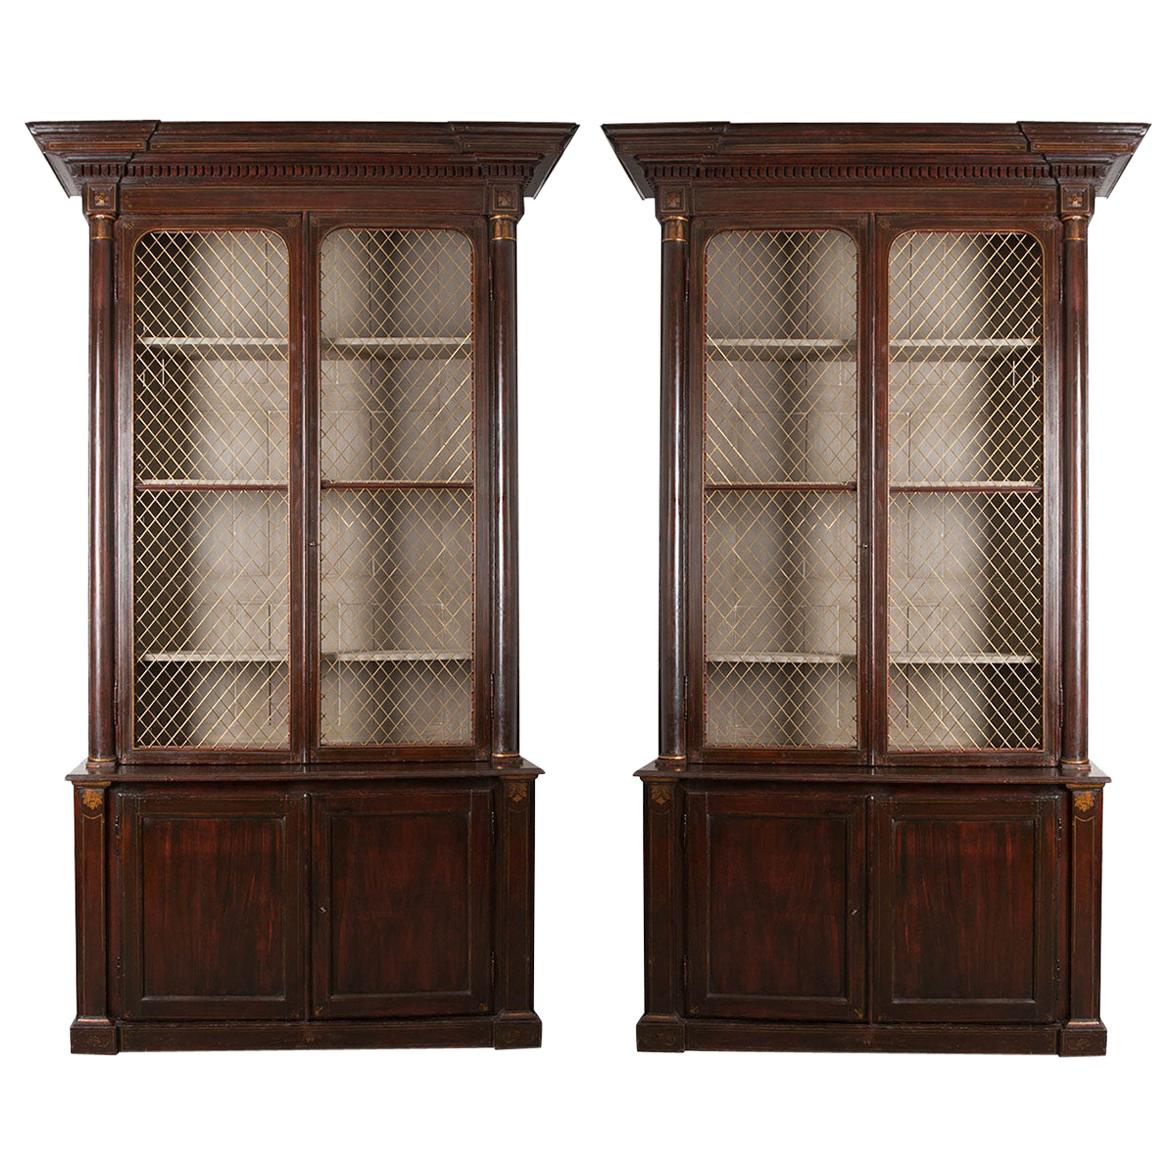 Pair of 19th Century English Regency Library Bookcases